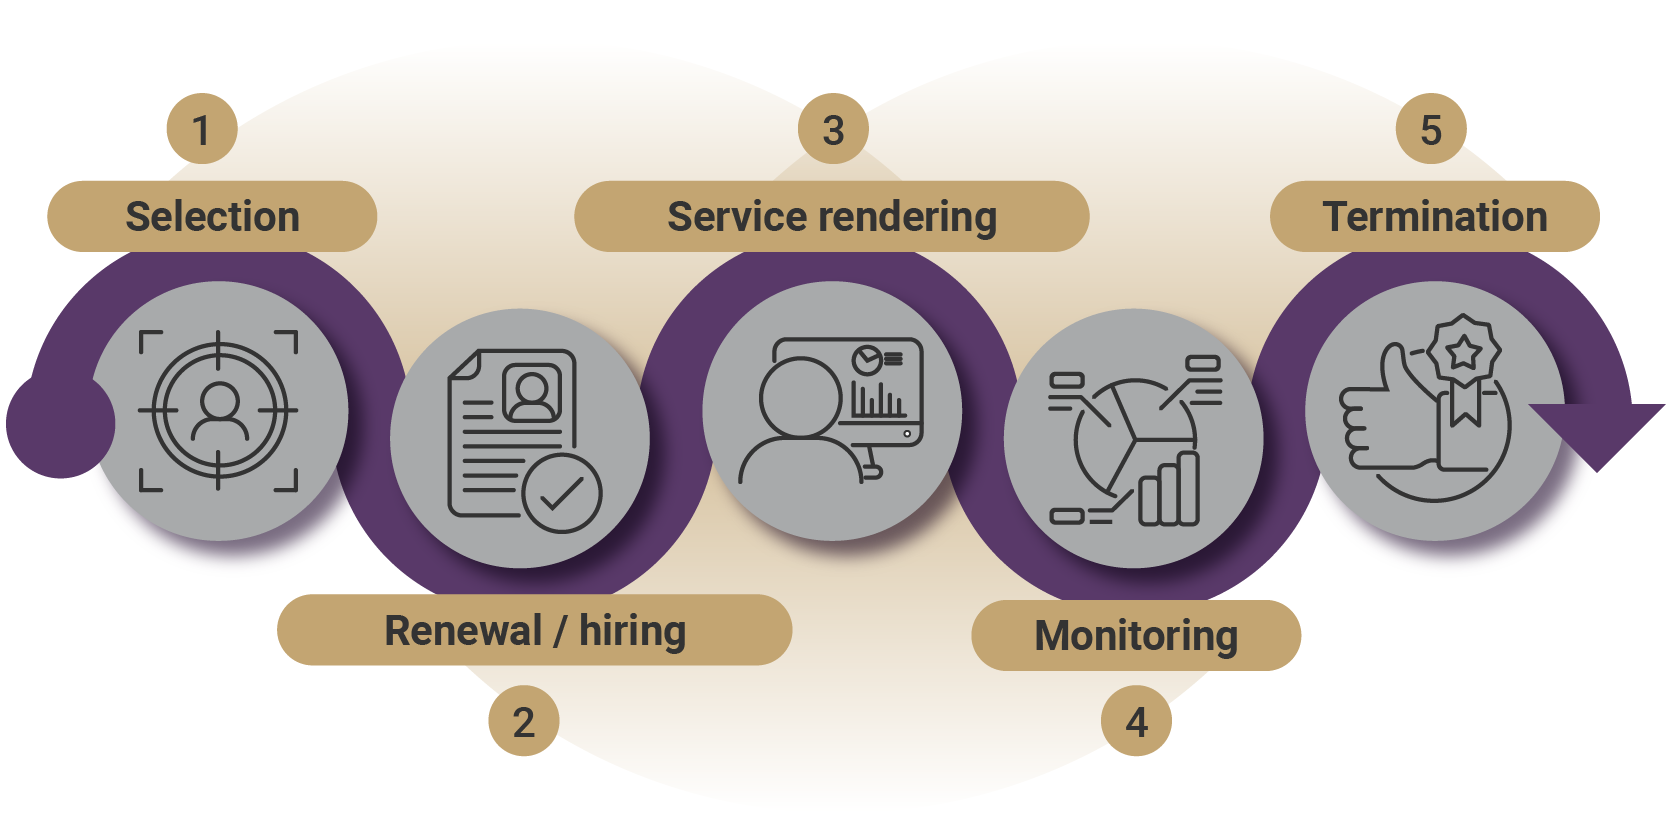 The life cycle of a third party comprises the following stages: selection, renewal-hiring, service rendering, monitoring, and termination.